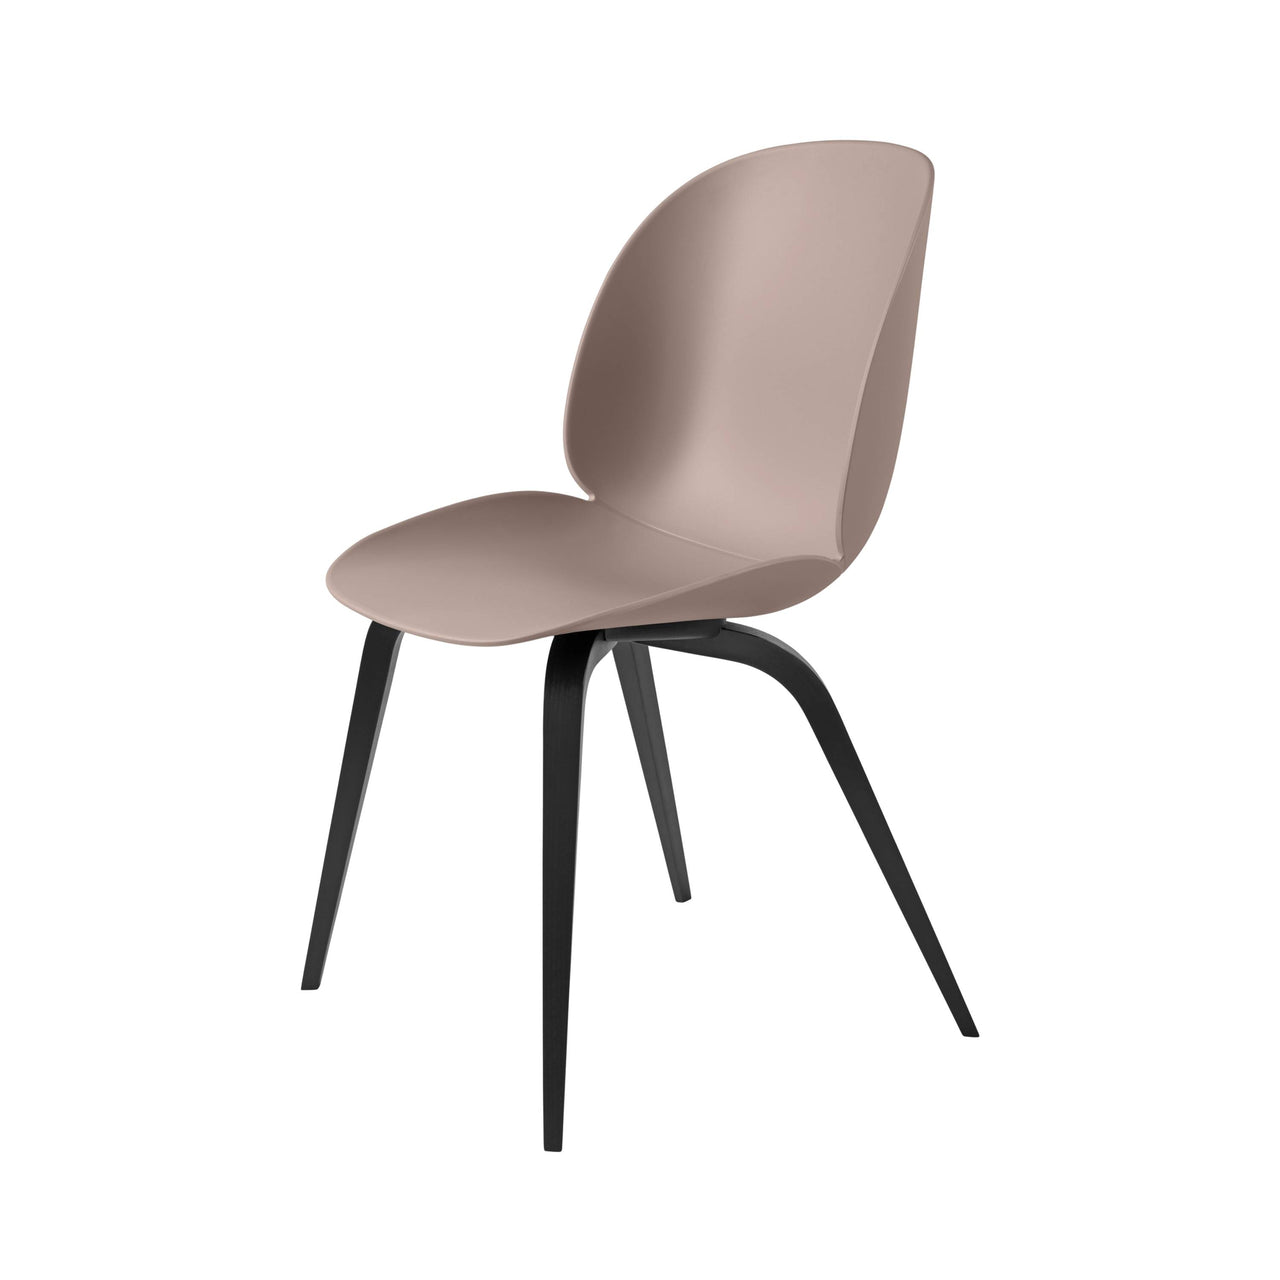 Beetle Dining Chair: Wood Base + Sweet Pink + Black Stained Beech + Plastic Glides